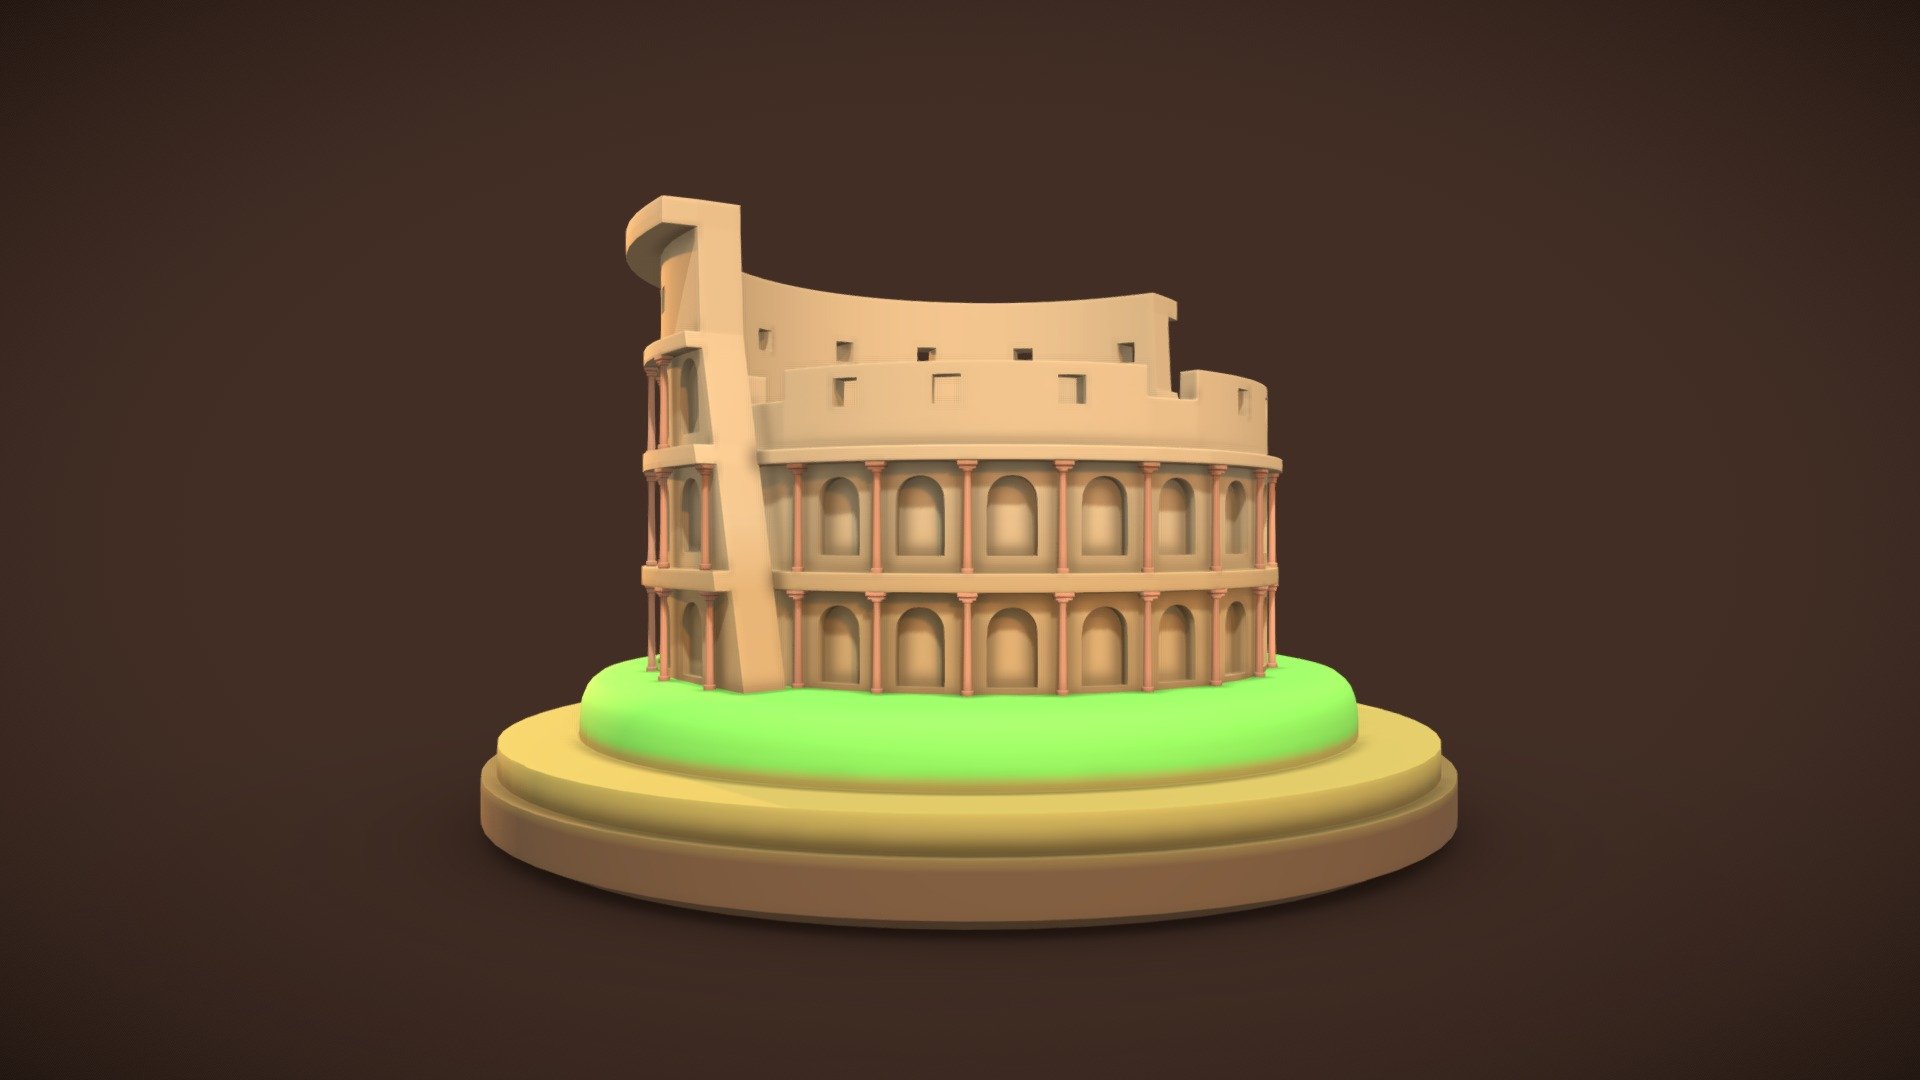 General:





ellipse shape




historical heritage in the form of a gladiator arena, built by Vespasian.




The Colosseum is designed to accommodate 50,000 spectators.




Seating in the Colosseum was divided into different levels based on social status in Roman society.




A large elliptical performance venue




located in a small town in Italy




low poly




Made entirely in Blender 2.93




Unique and simple shapes for 3D models.




The model is ready for 3D printing.



The zip archive includes:





Includes 3d format: BLEND / OBJ / FBX




materials




Download with size 11MB



**Hope you like it 3d model